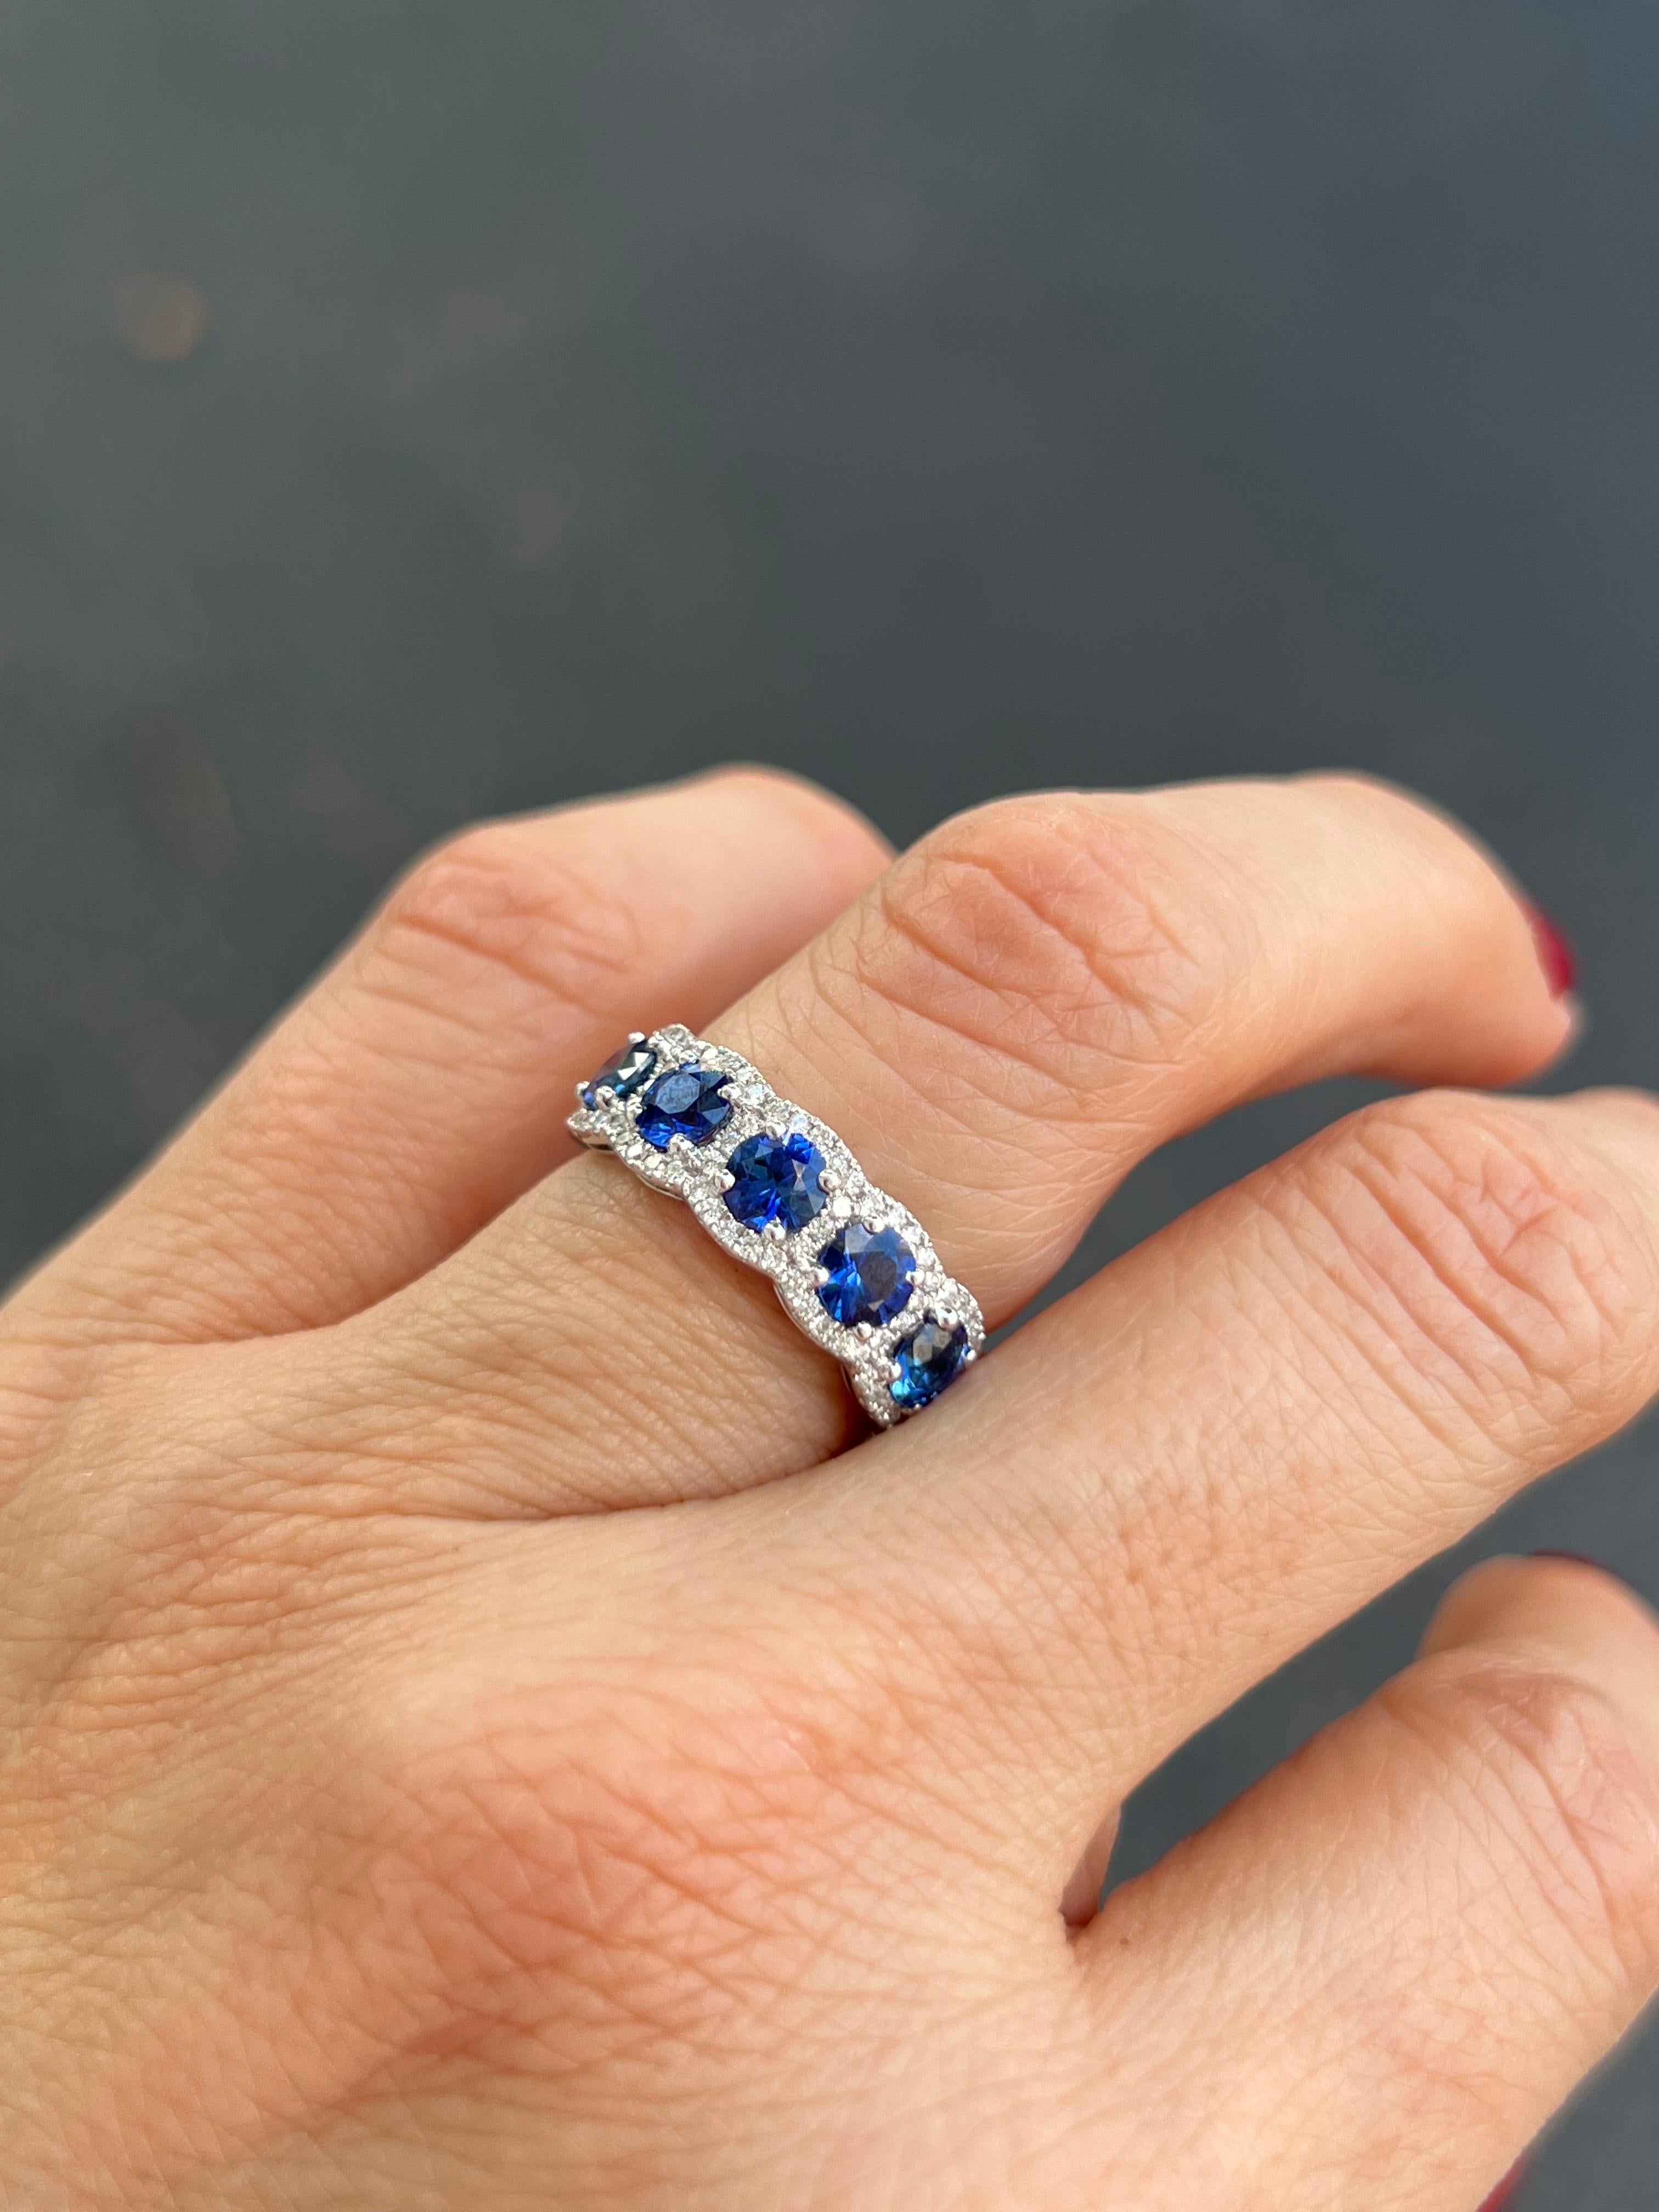 18K white gold sapphire and diamond band.

Features
18K white gold
1.85 carat total weight in sapphire
.32 carat total weigh in diamonds
The finished ring width is 6.5 mm at the top and tapers to 3mm a the sizing bar. 
Ring size 6, can be sized.